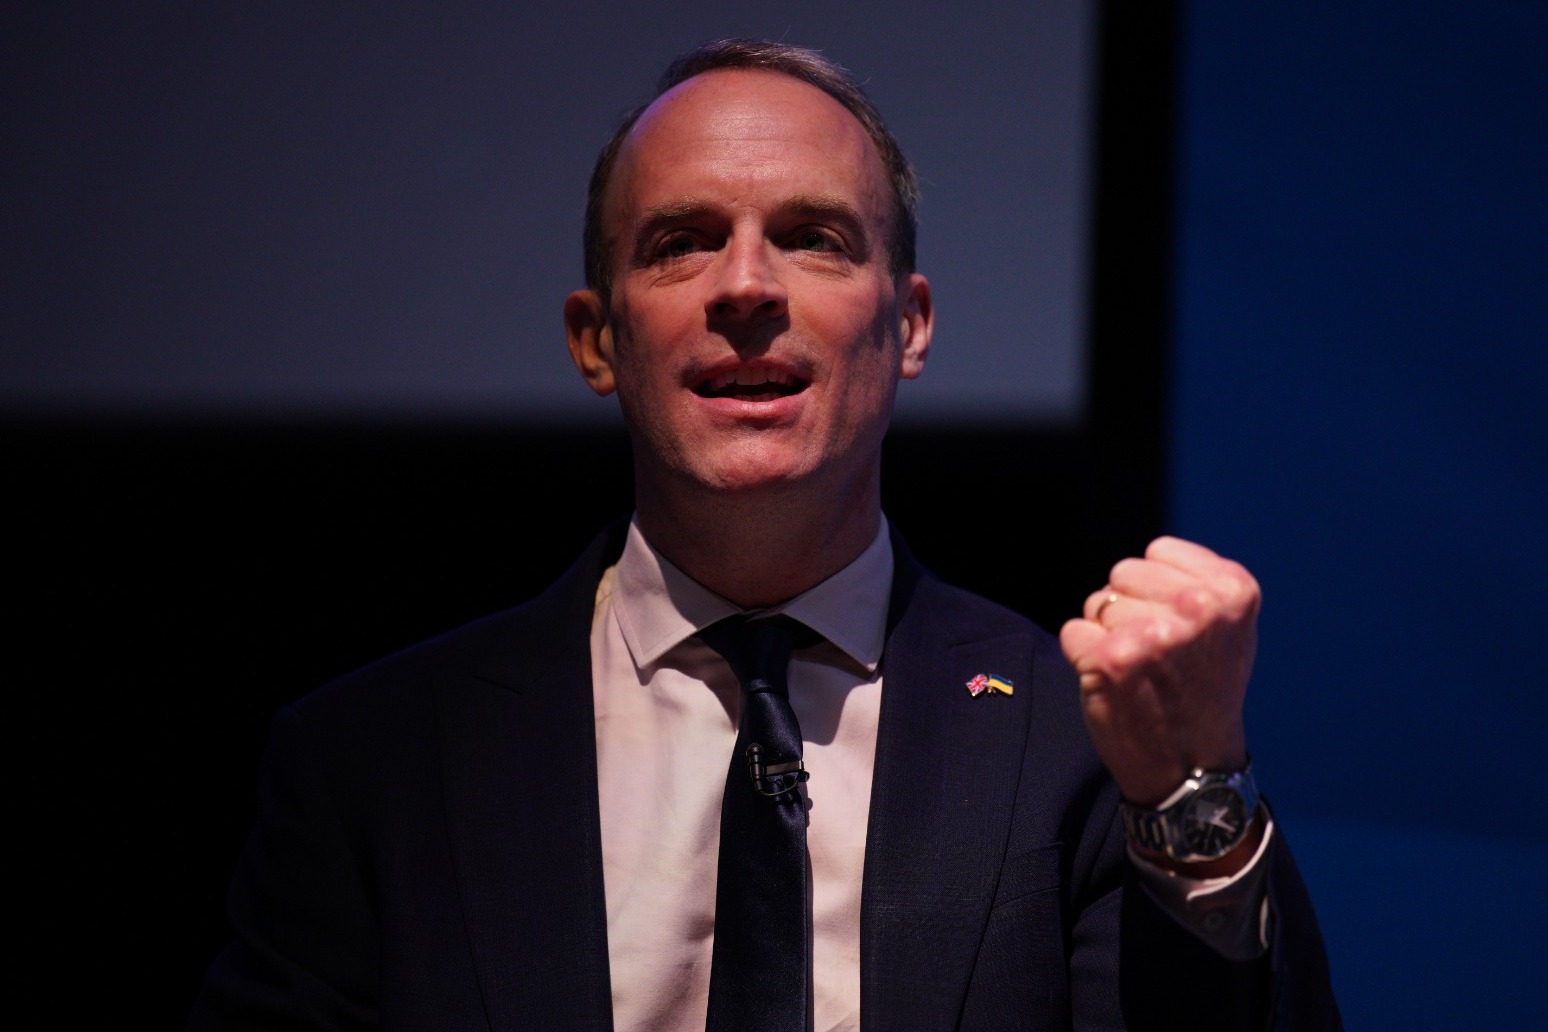 Raab Bill of Rights would give free speech a legal trump card